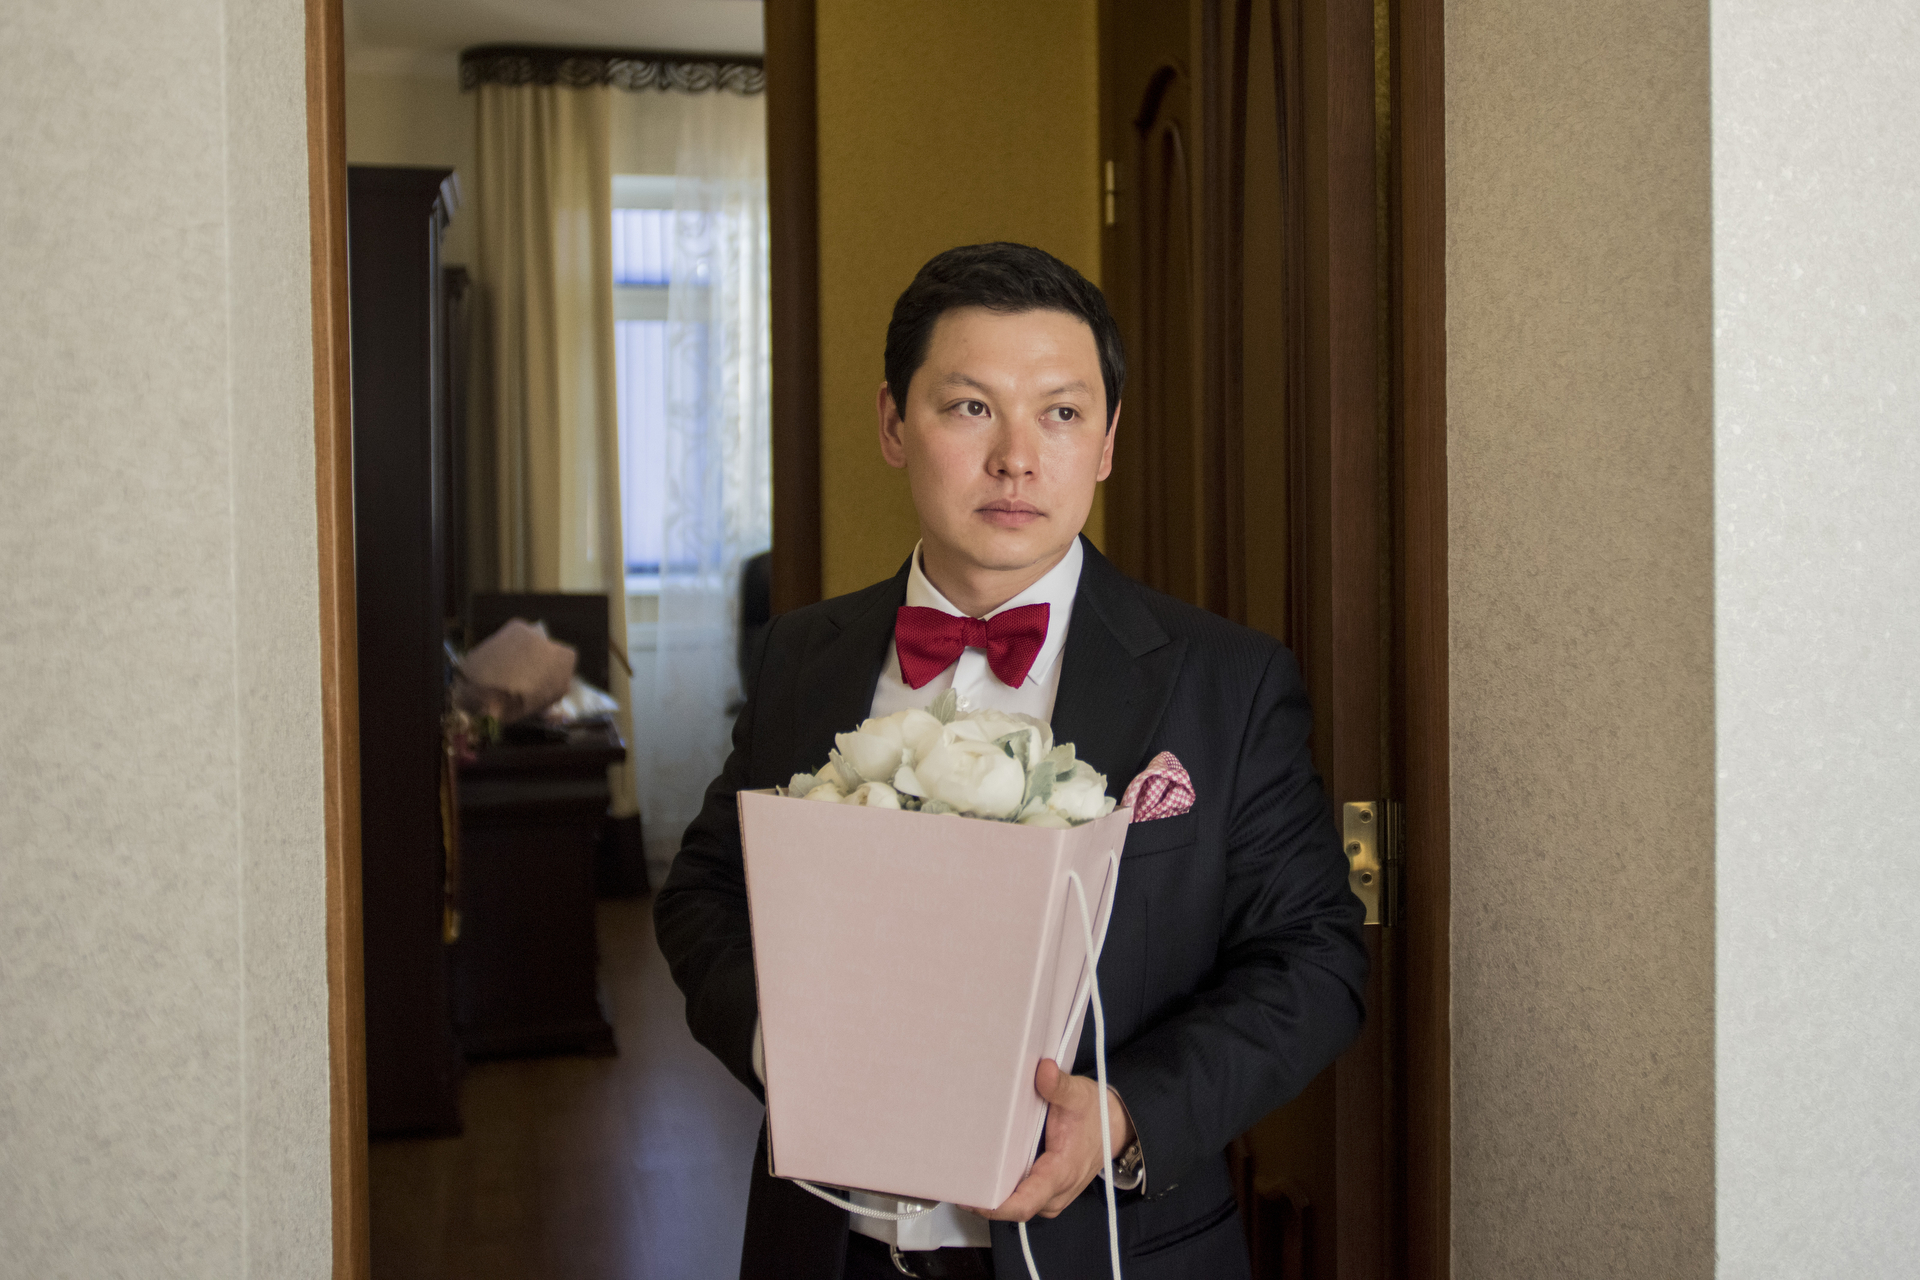  Alexey Makarov carrying a wedding bouquet. The tradition in Kalmykia states that before the ceremony the groom has to pick up the bride from her parents home. Kalmyk's has abandoned most Mongolian wedding traditions to a more international approach 